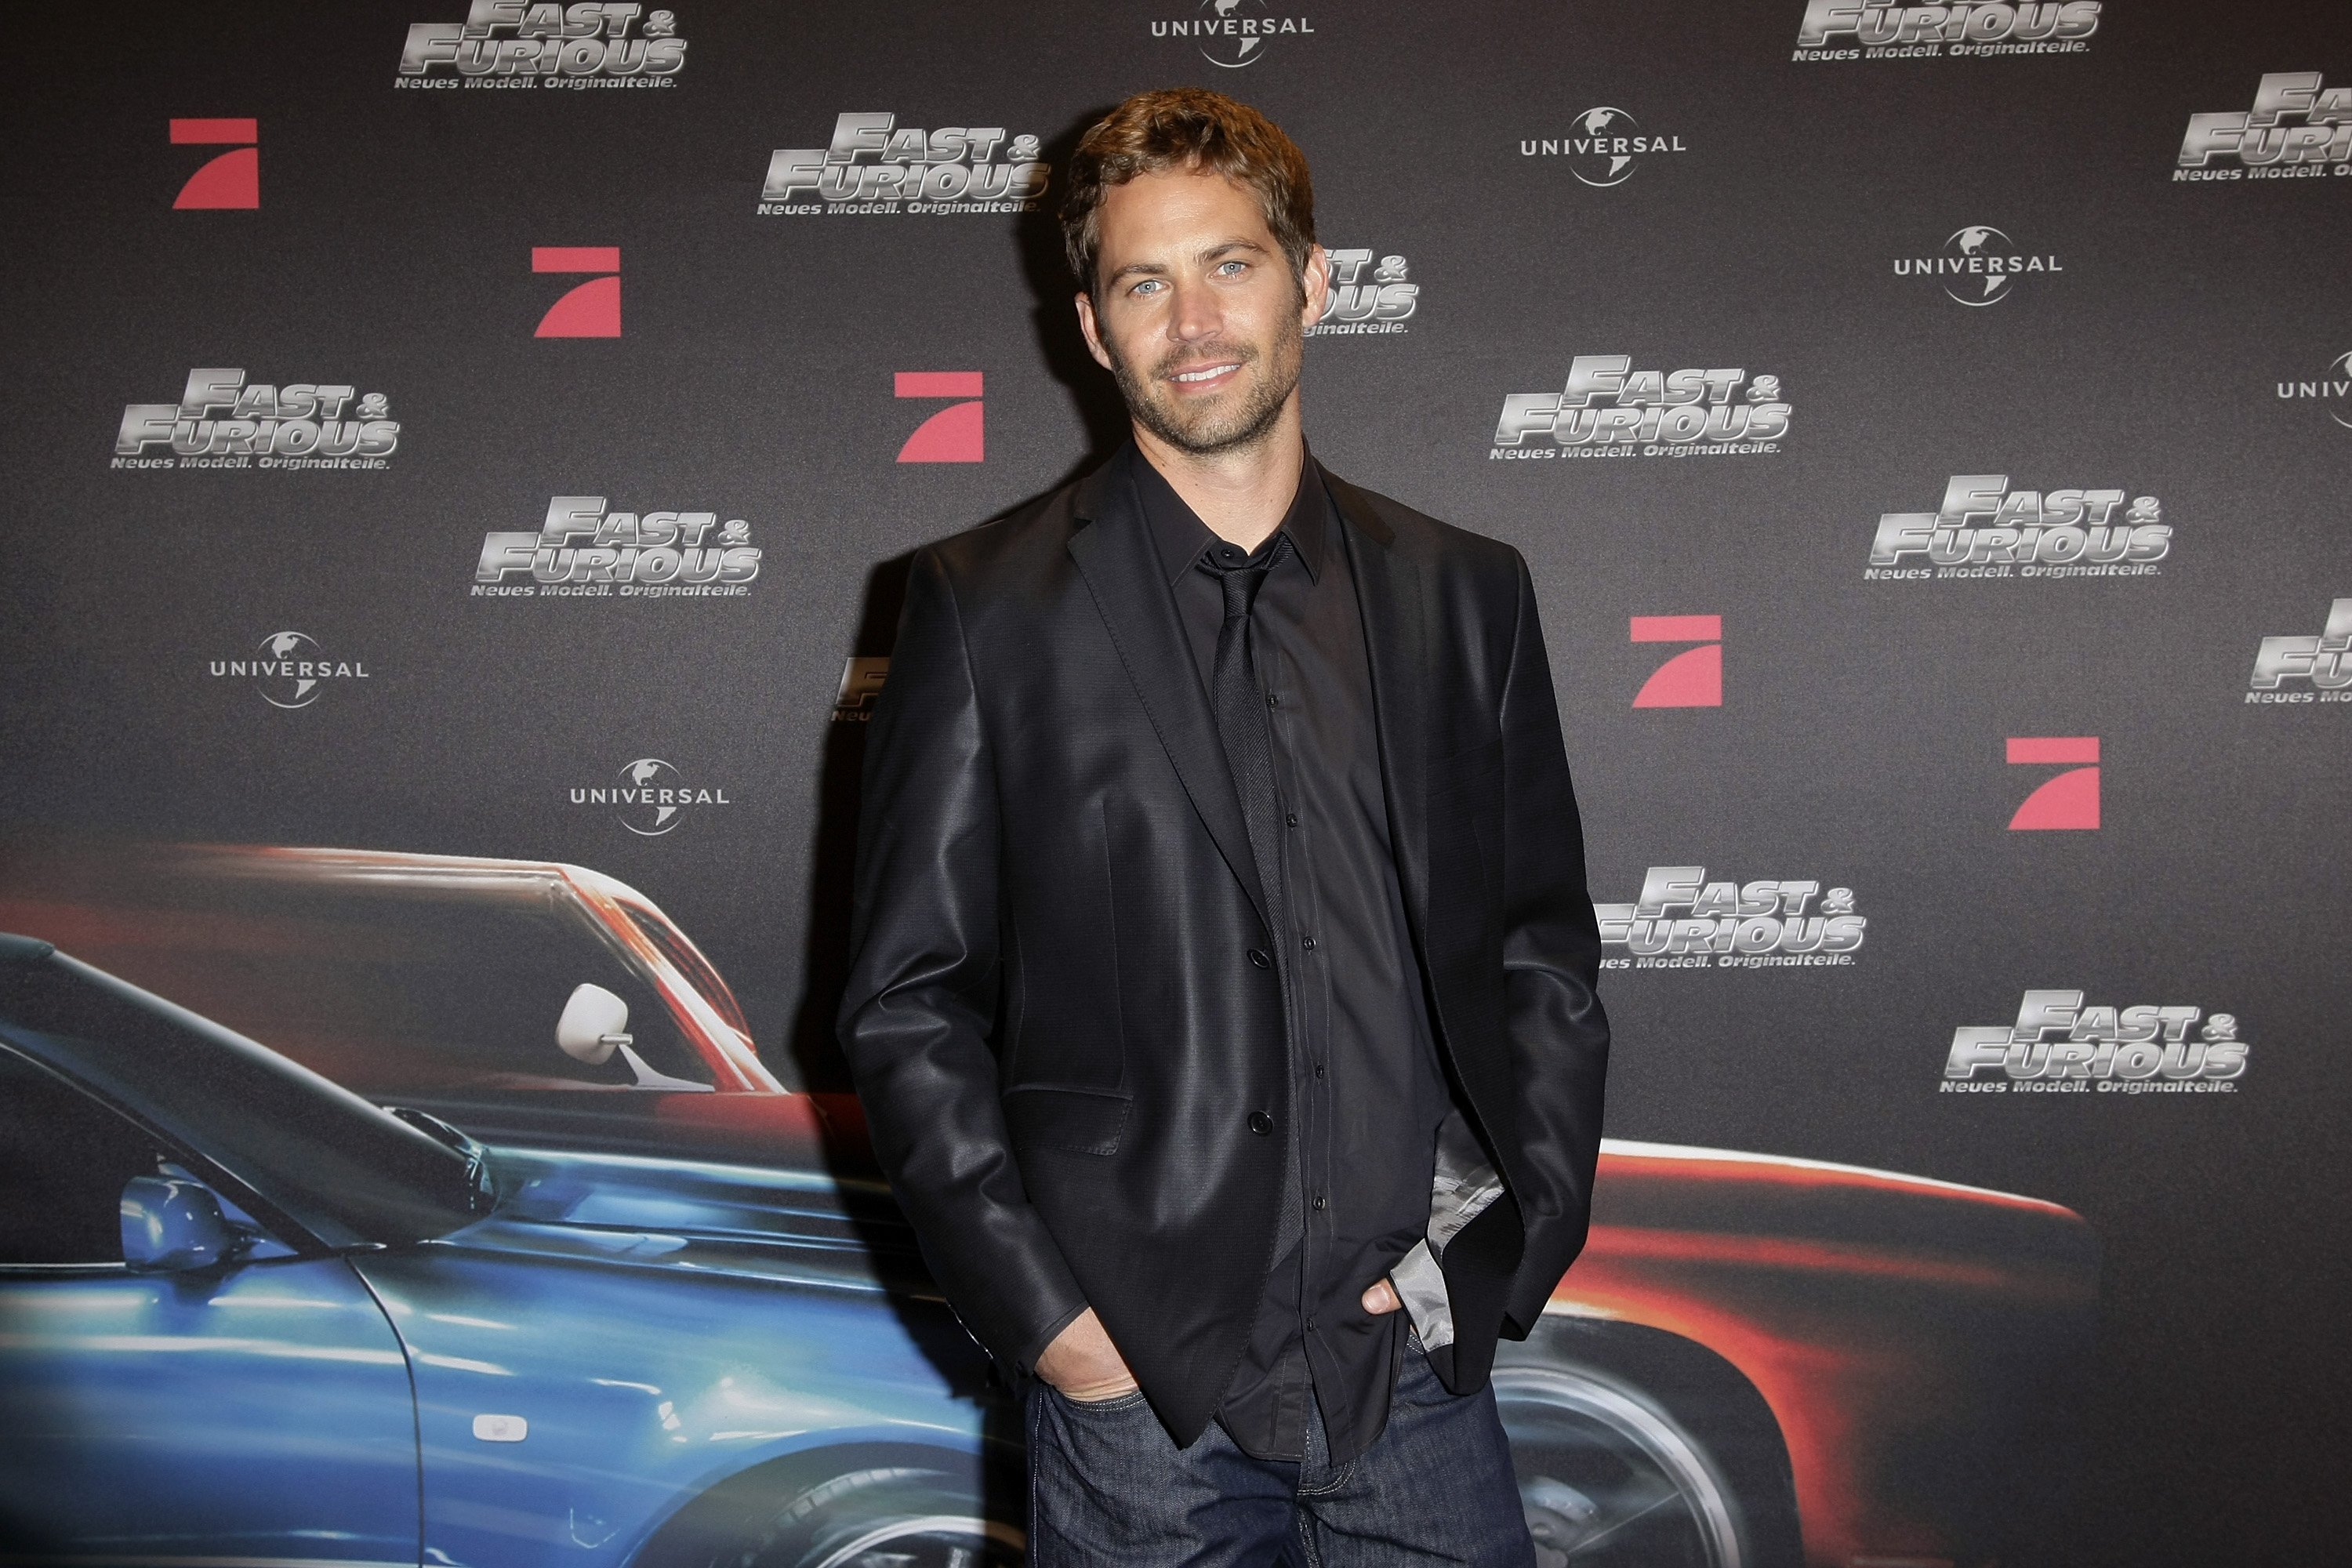 Paul Walker attends the premiere of "The Fast and the Furious 4" at Ruhrpark on March 17, 2009 in Bochum, Germany.  | Photo: Getty Images